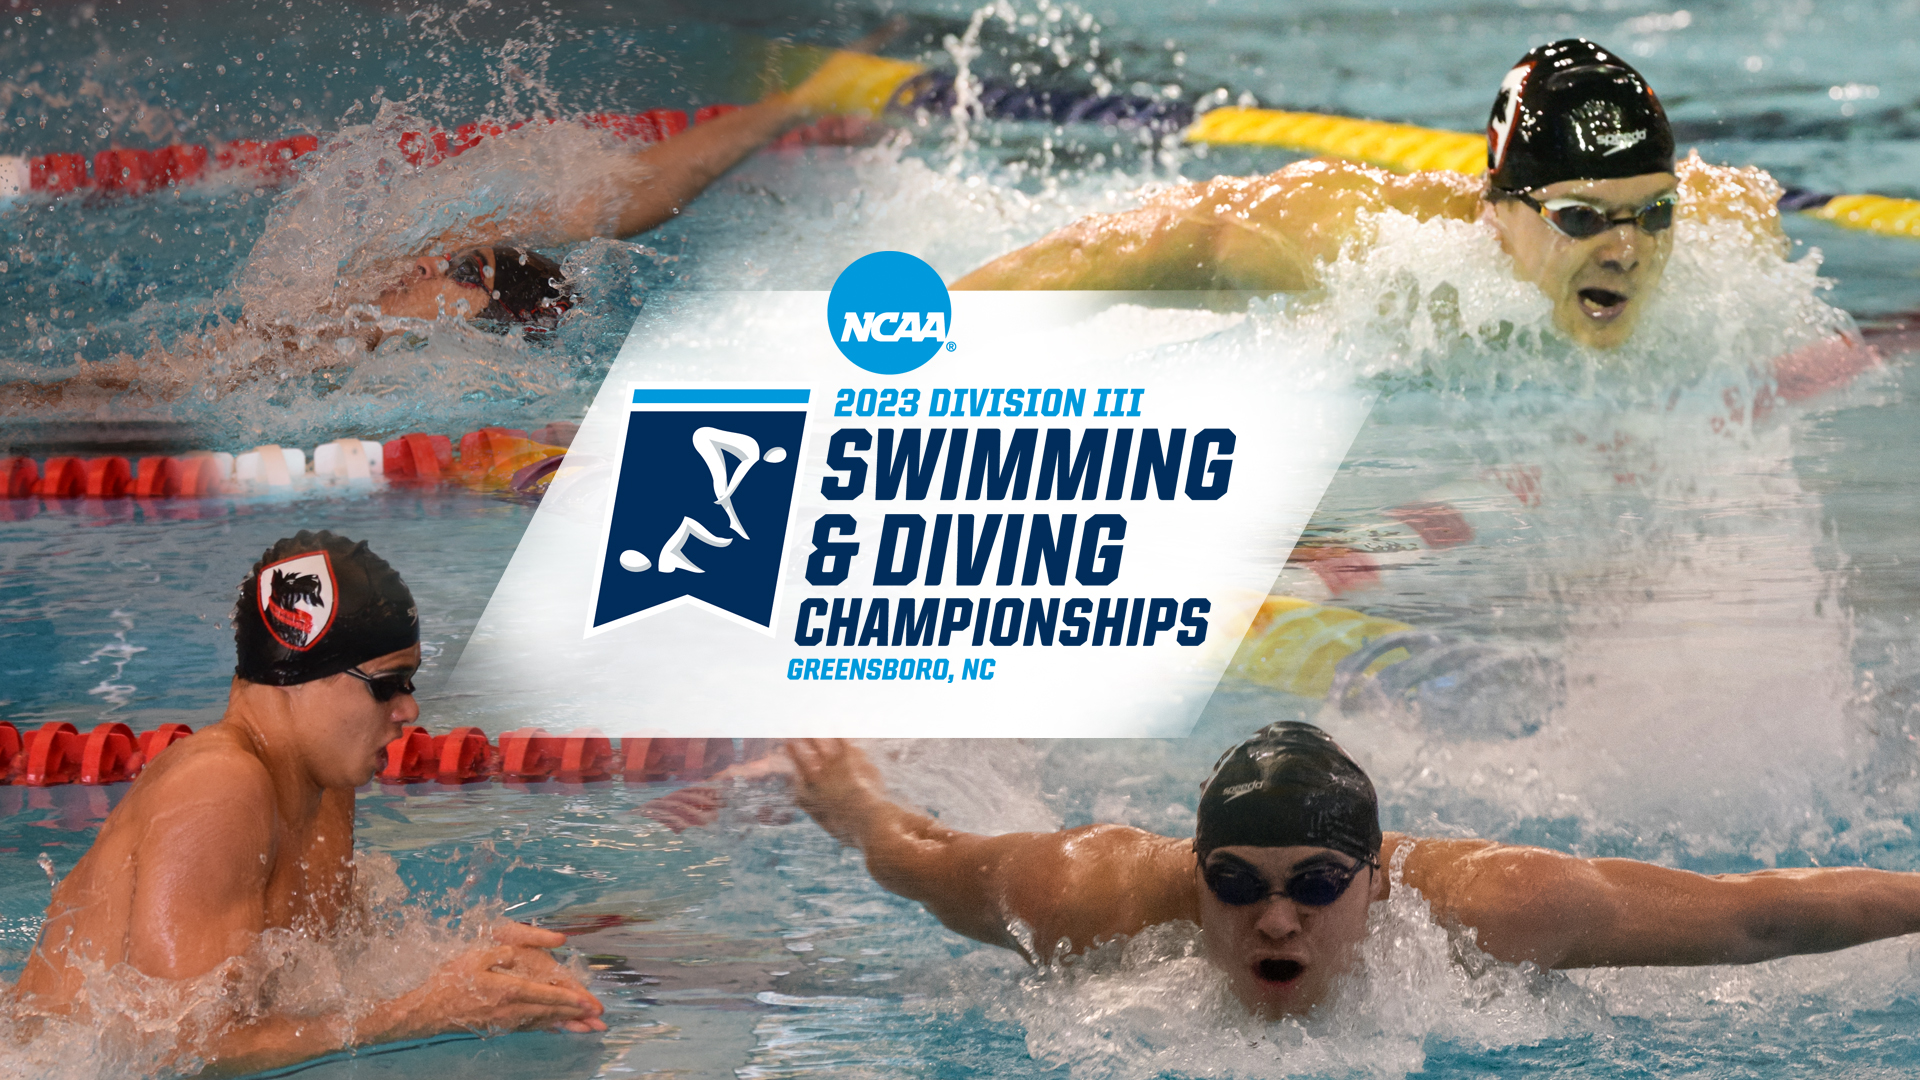 collage of four men's swimmers in the corners of the image with the NCAA Swimming and Diving Championships logo in the center